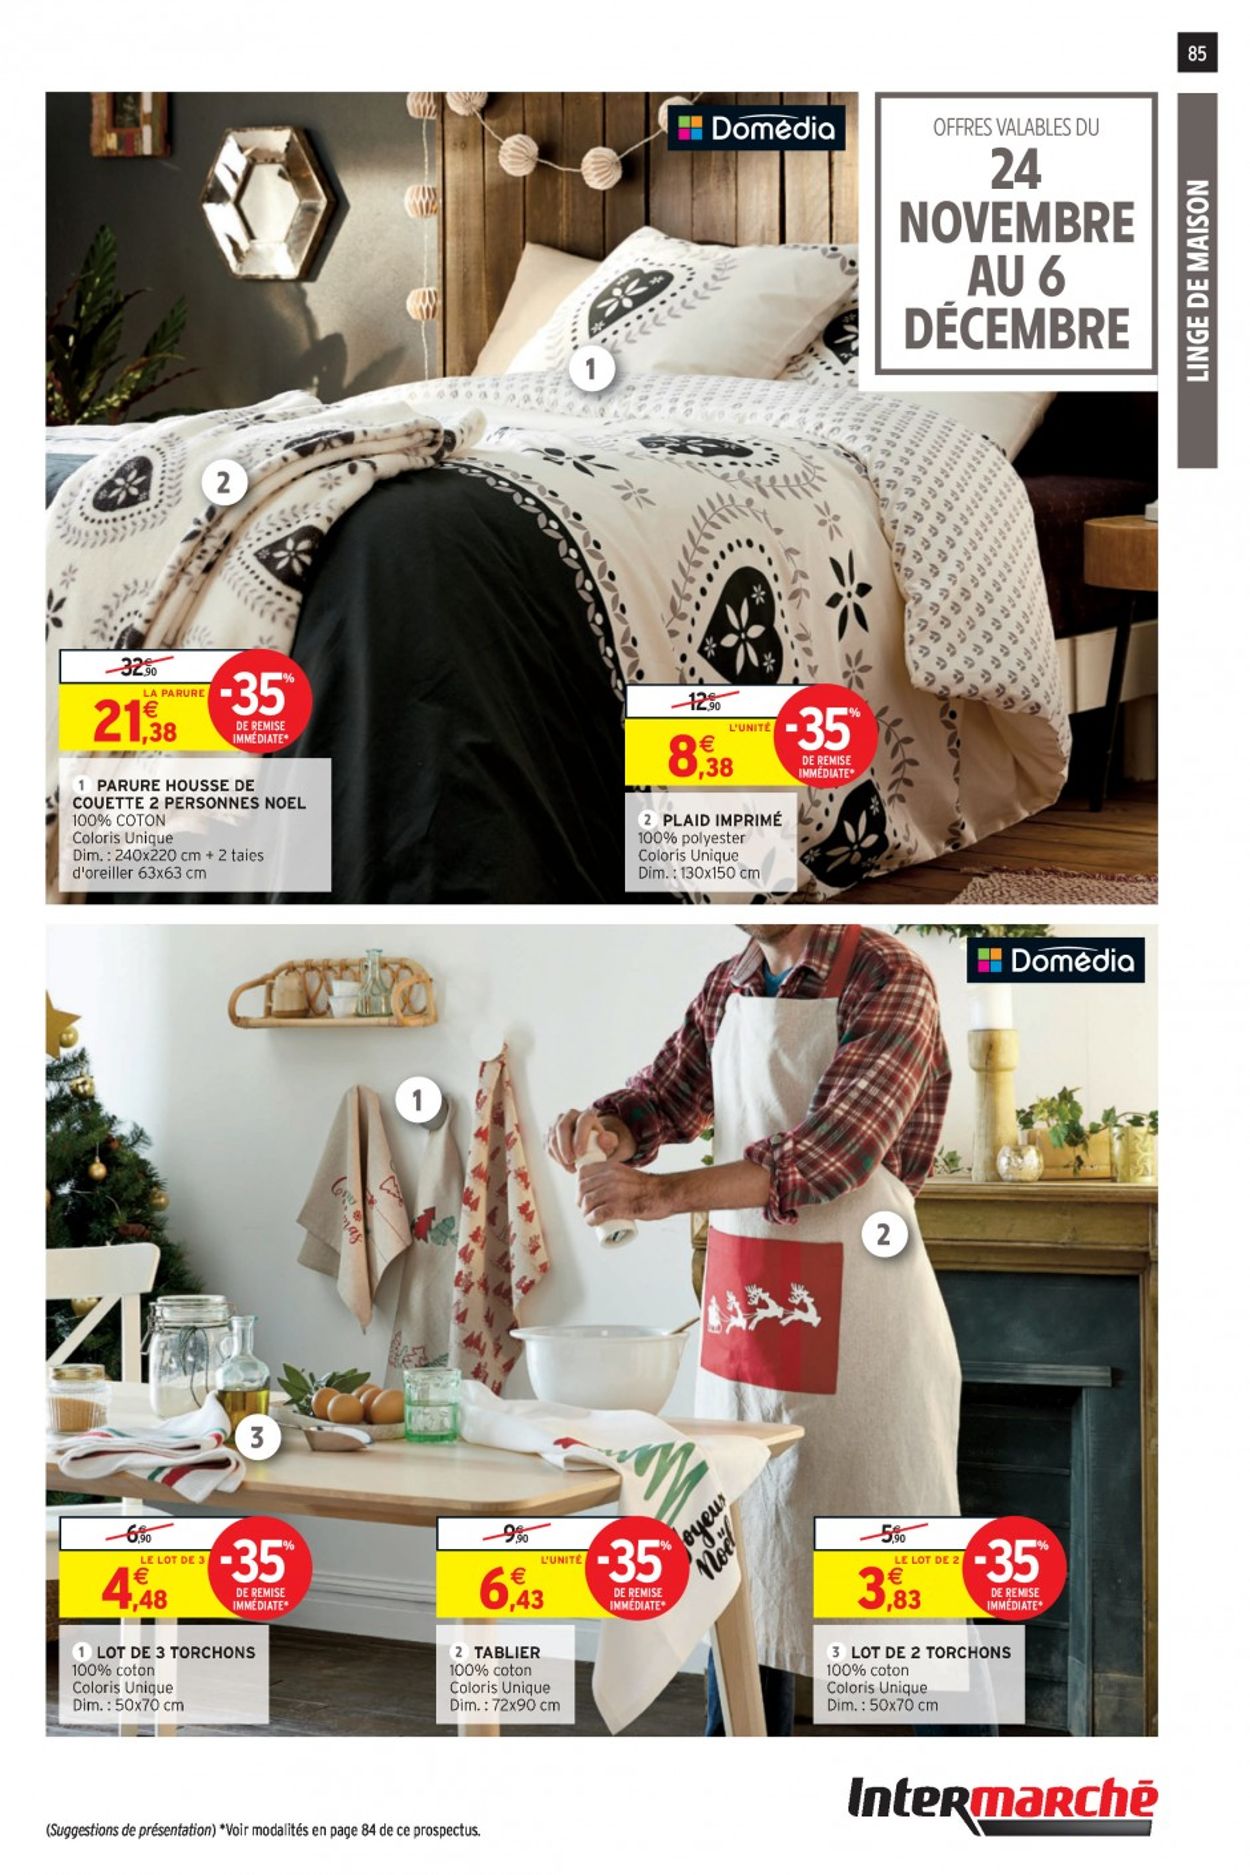 Intermarché Black Friday 2020 Catalogue - 24.11-29.11.2020 (Page 85)